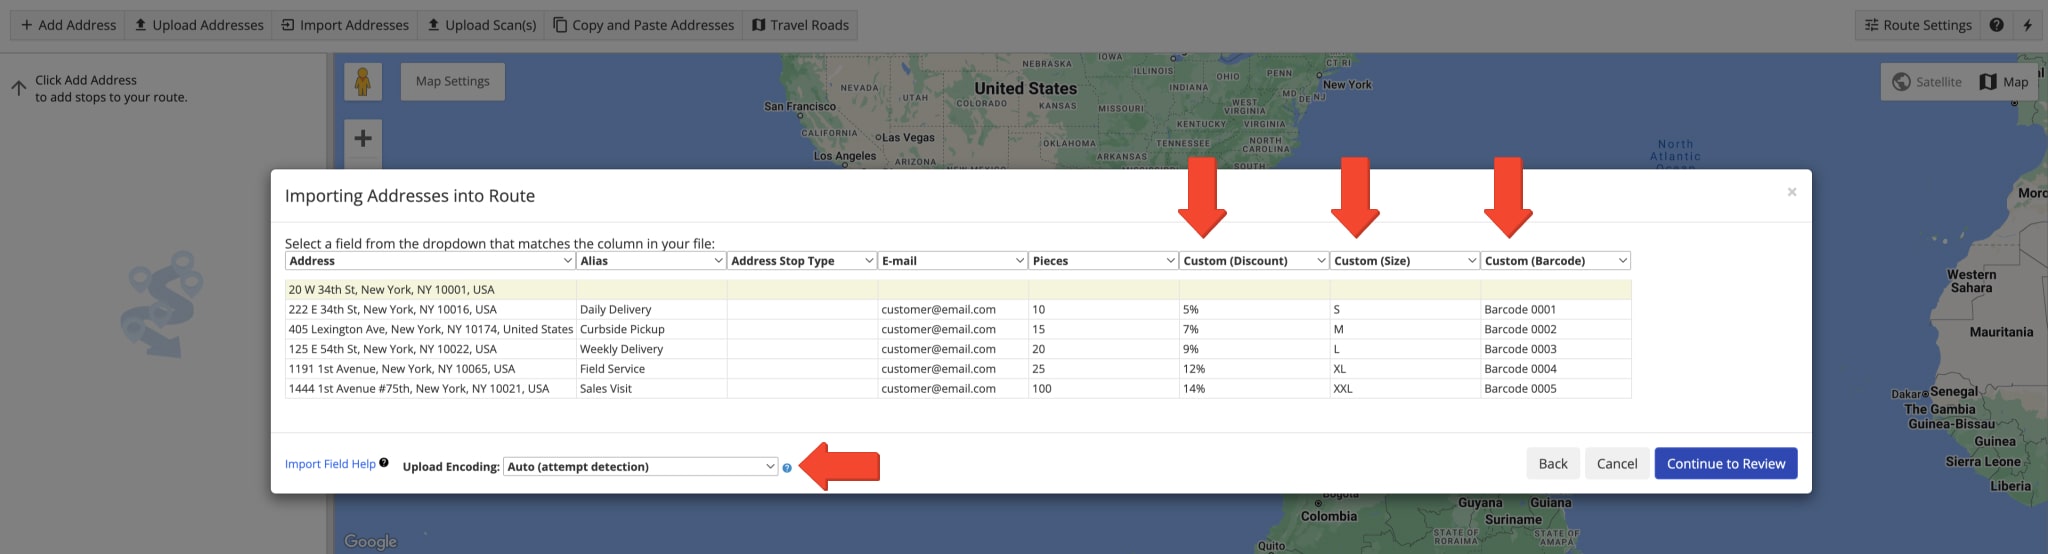 Verify addresses and custom data in the uploaded route spreadsheet and proceed to plan and optimize last-mile routes.